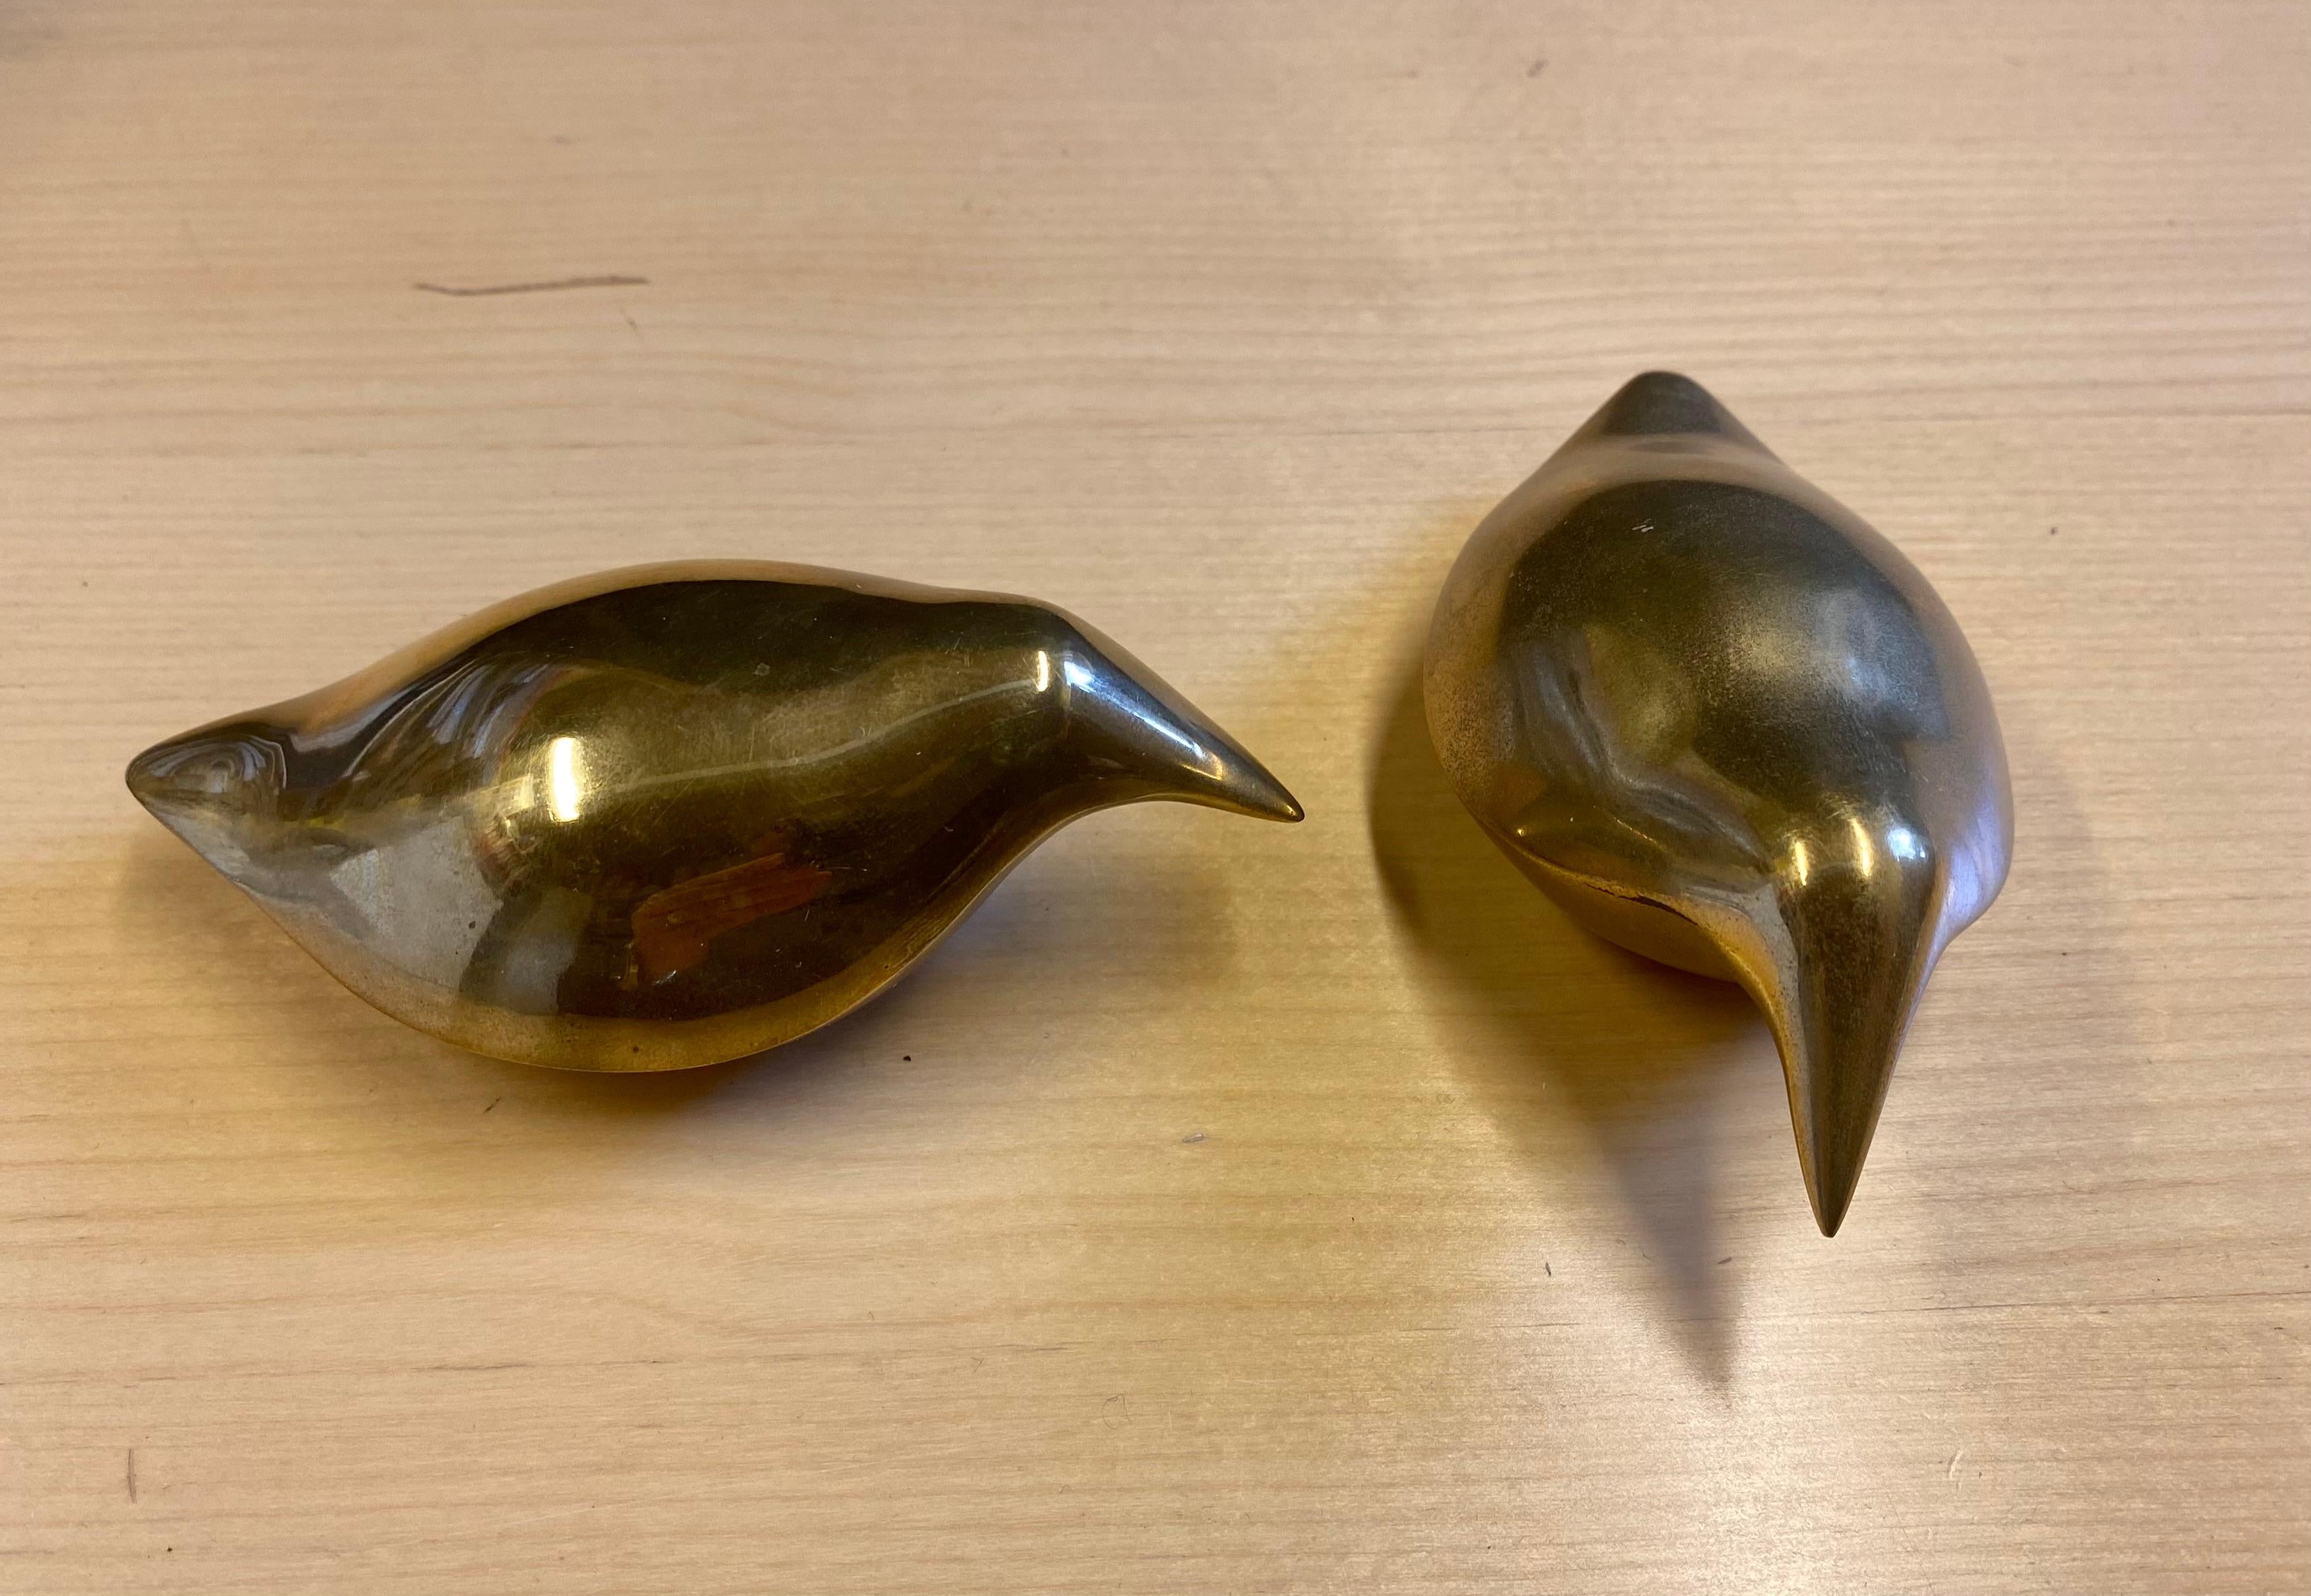 Tapio Wirkkala bronze Bird paperweight (Production discontinued)
Paper printing is also a beautiful home decoration detail in its own right.

The size of the bird is about 100 x 36 mm. Weight 465 grams.

Produced by Kultakeskus
One stamped, the